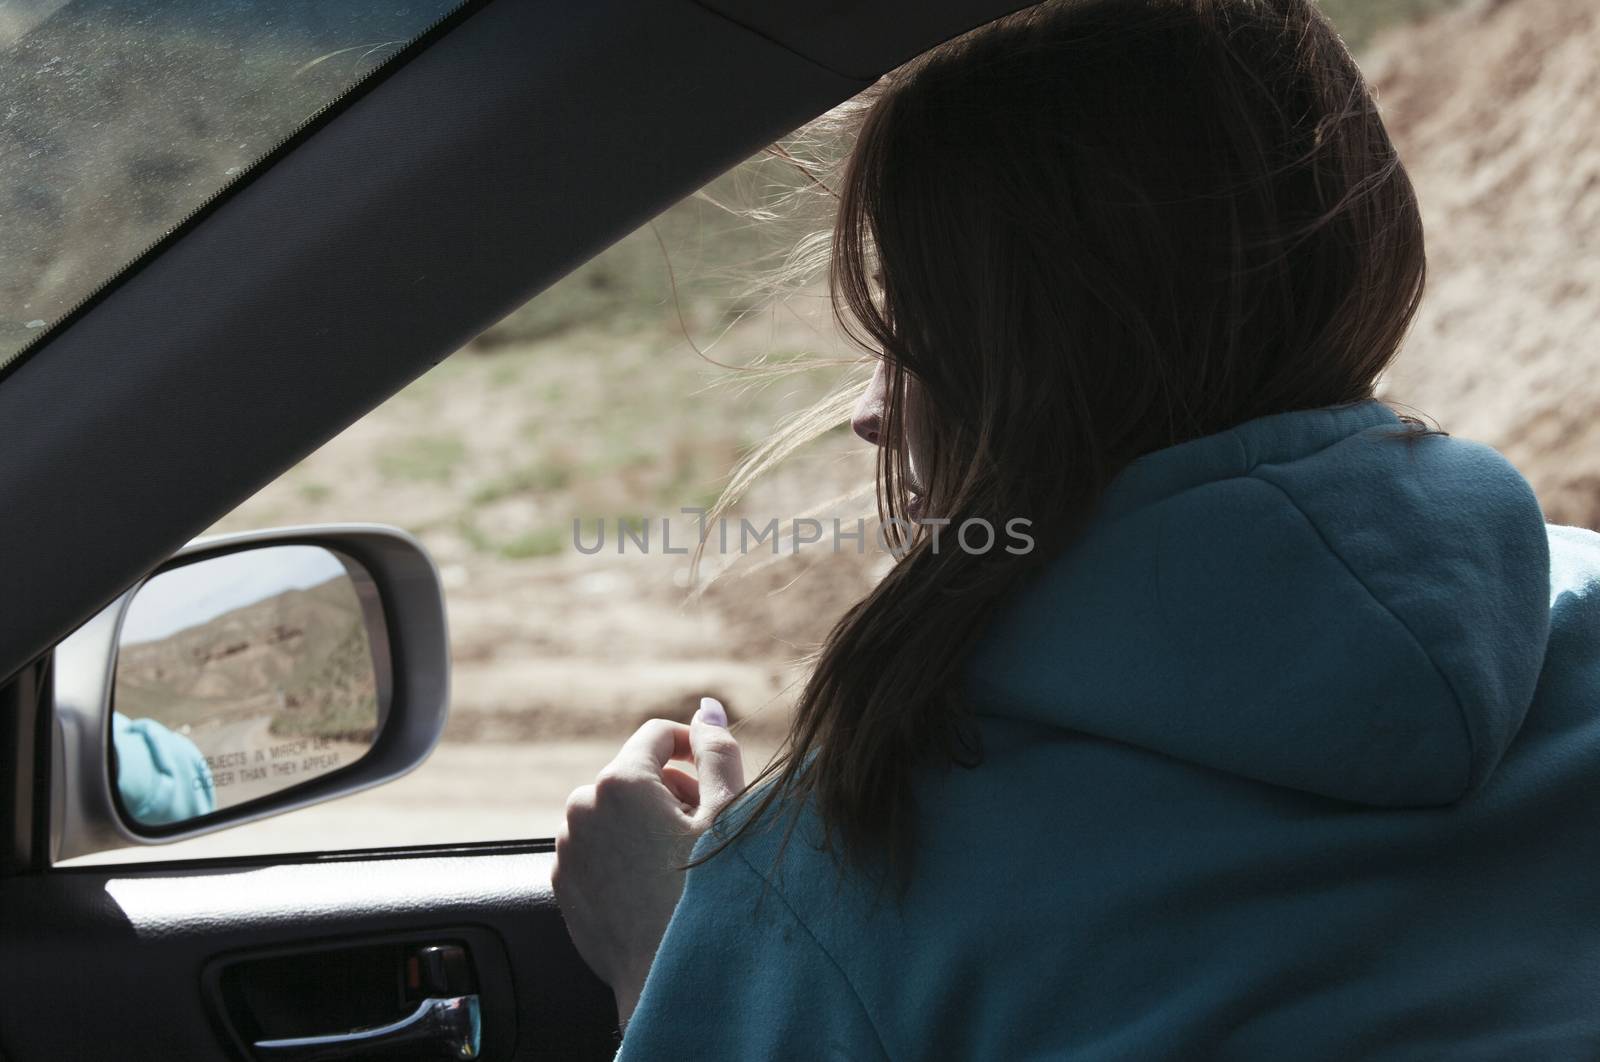 The European girl goes in the car having put out the head in a window